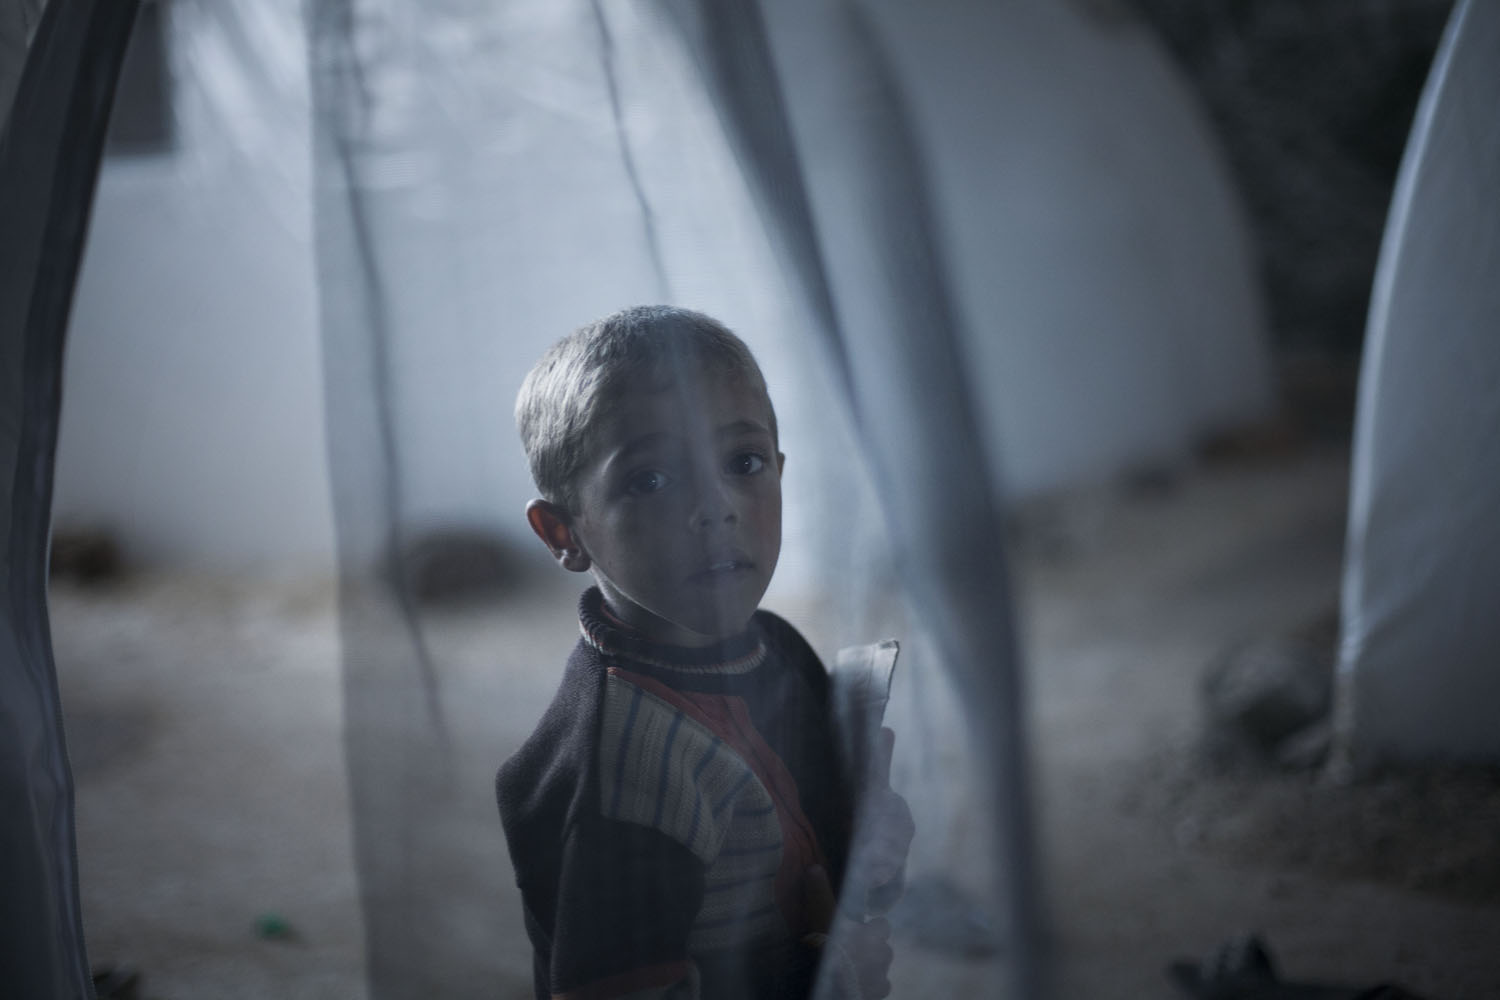 Oct. 7, 2012. A Syrian boy, who fled his home with his family due to fighting between government forces and rebels, stands near his tent at a refugee camp near the Turkish border in Azaz, Syria.